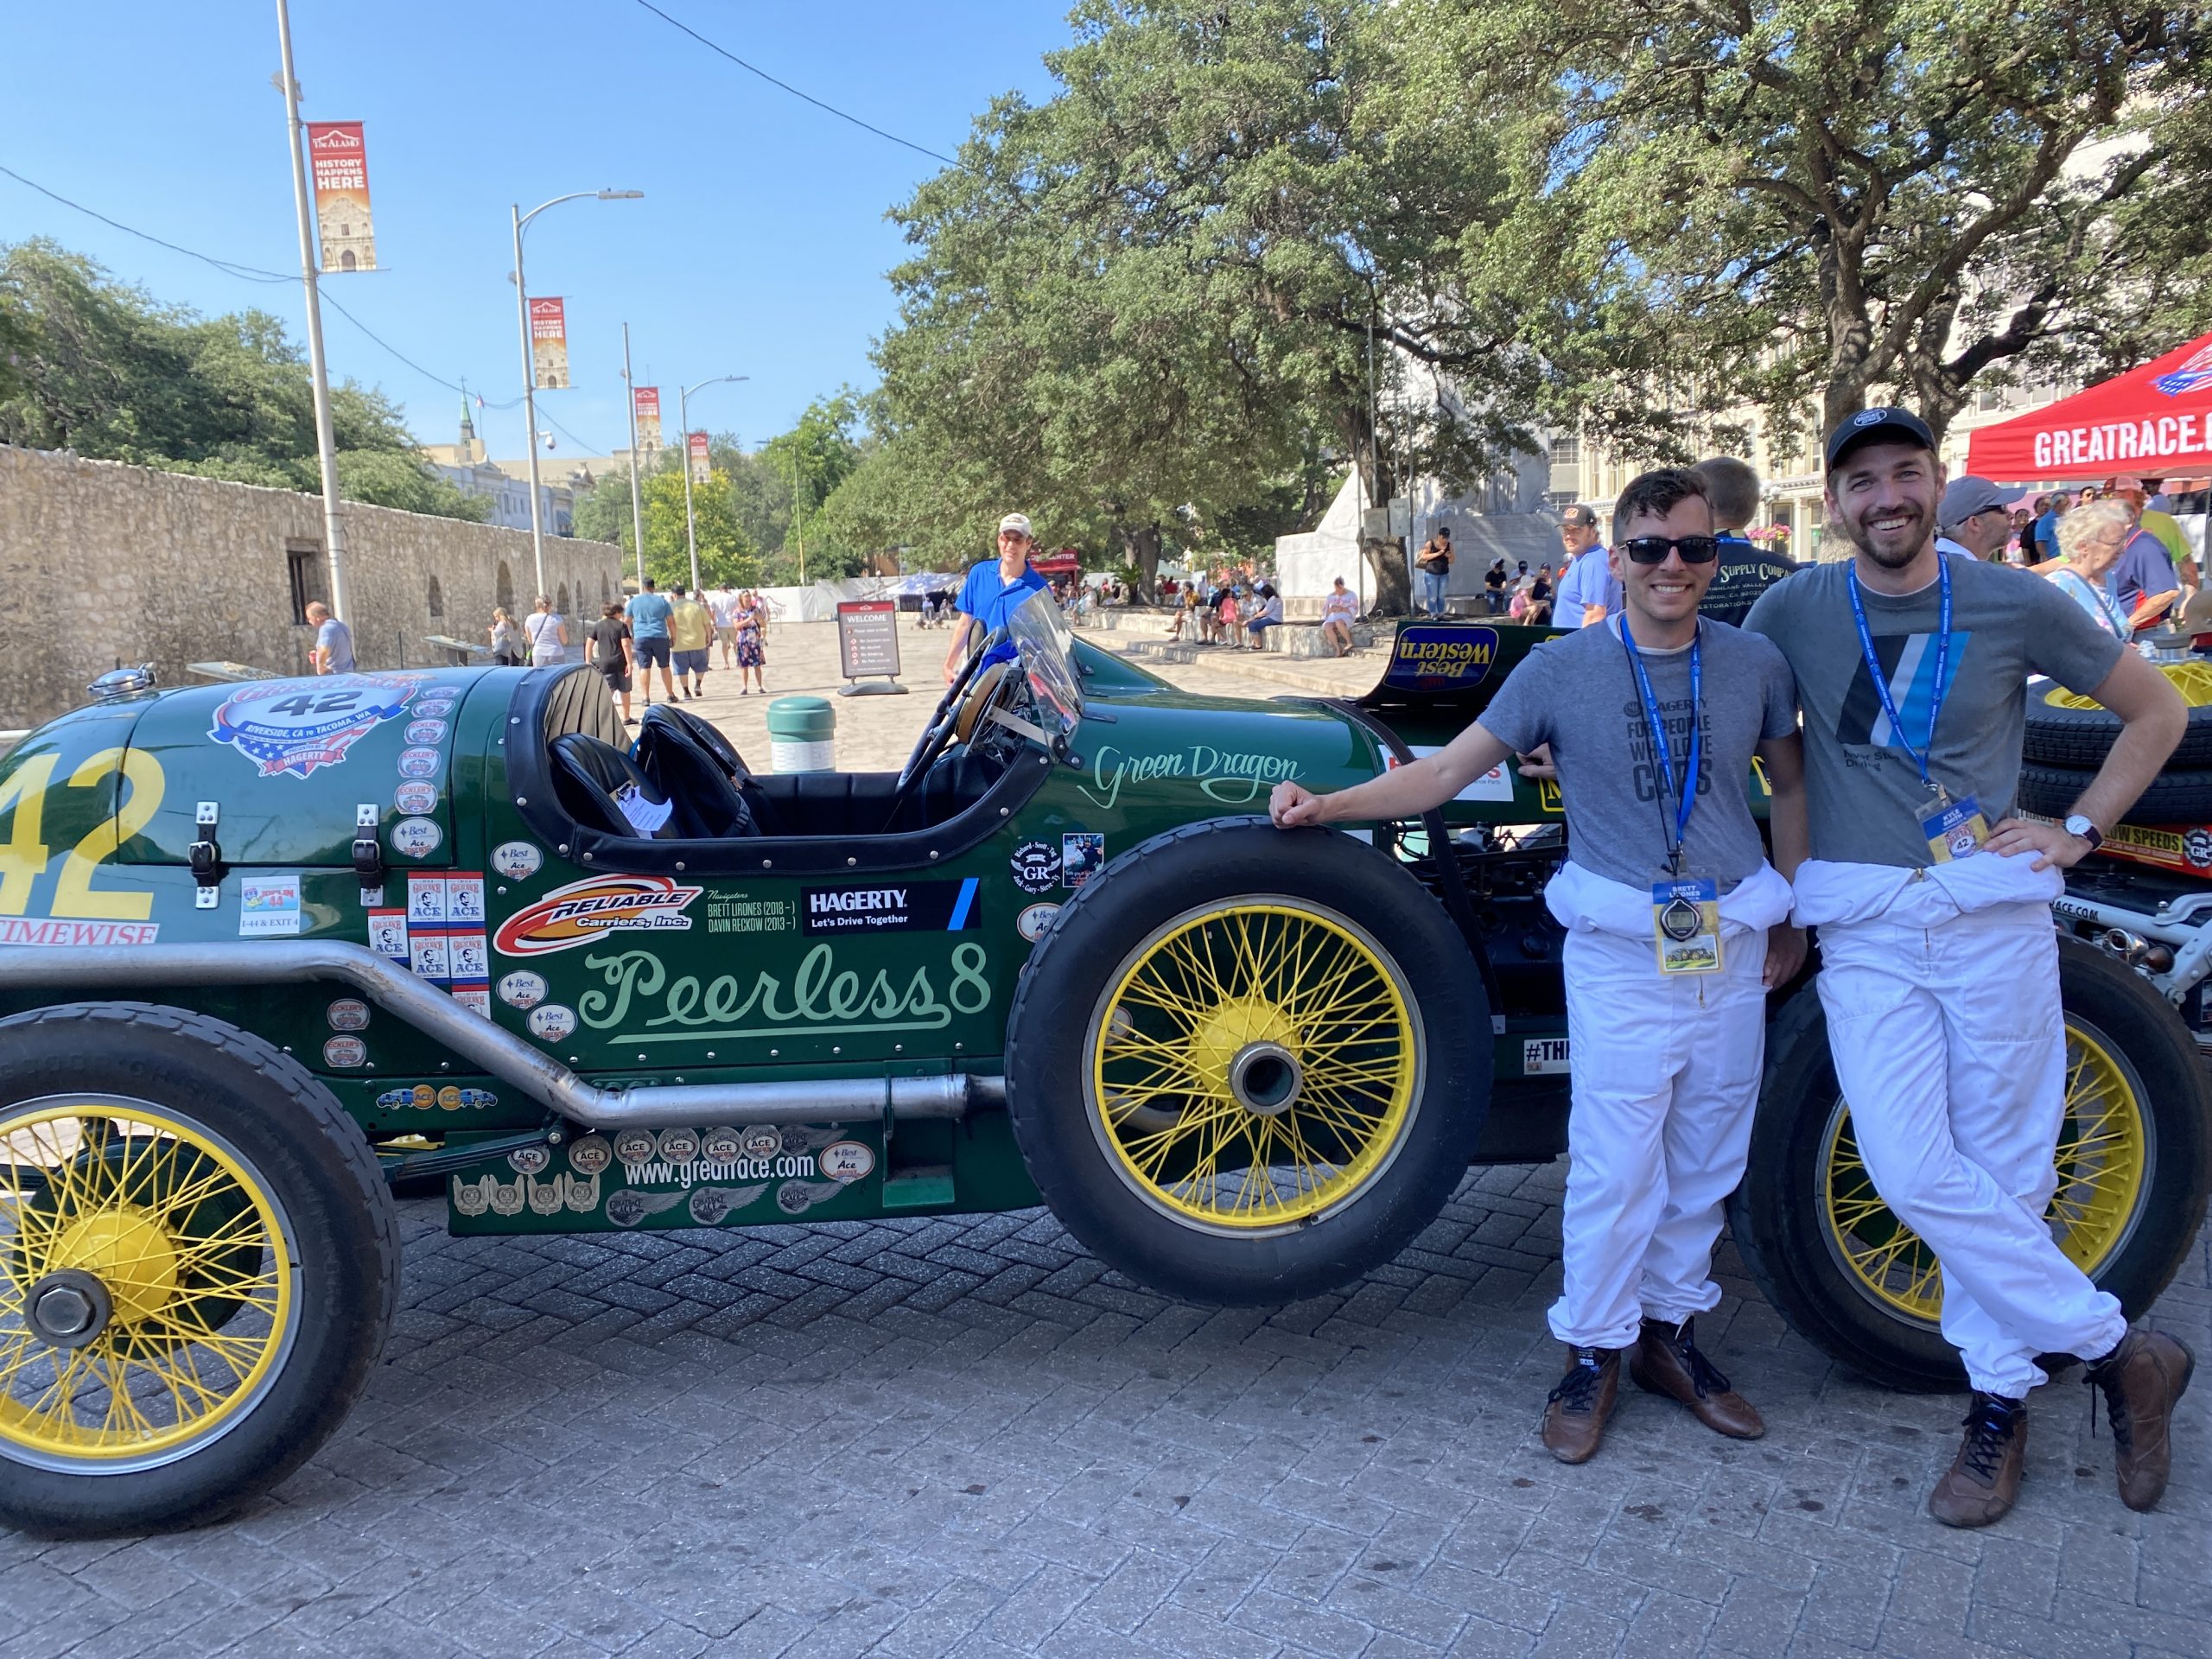 Great Race 2021: The Green Dragon rides again | Hagerty Media